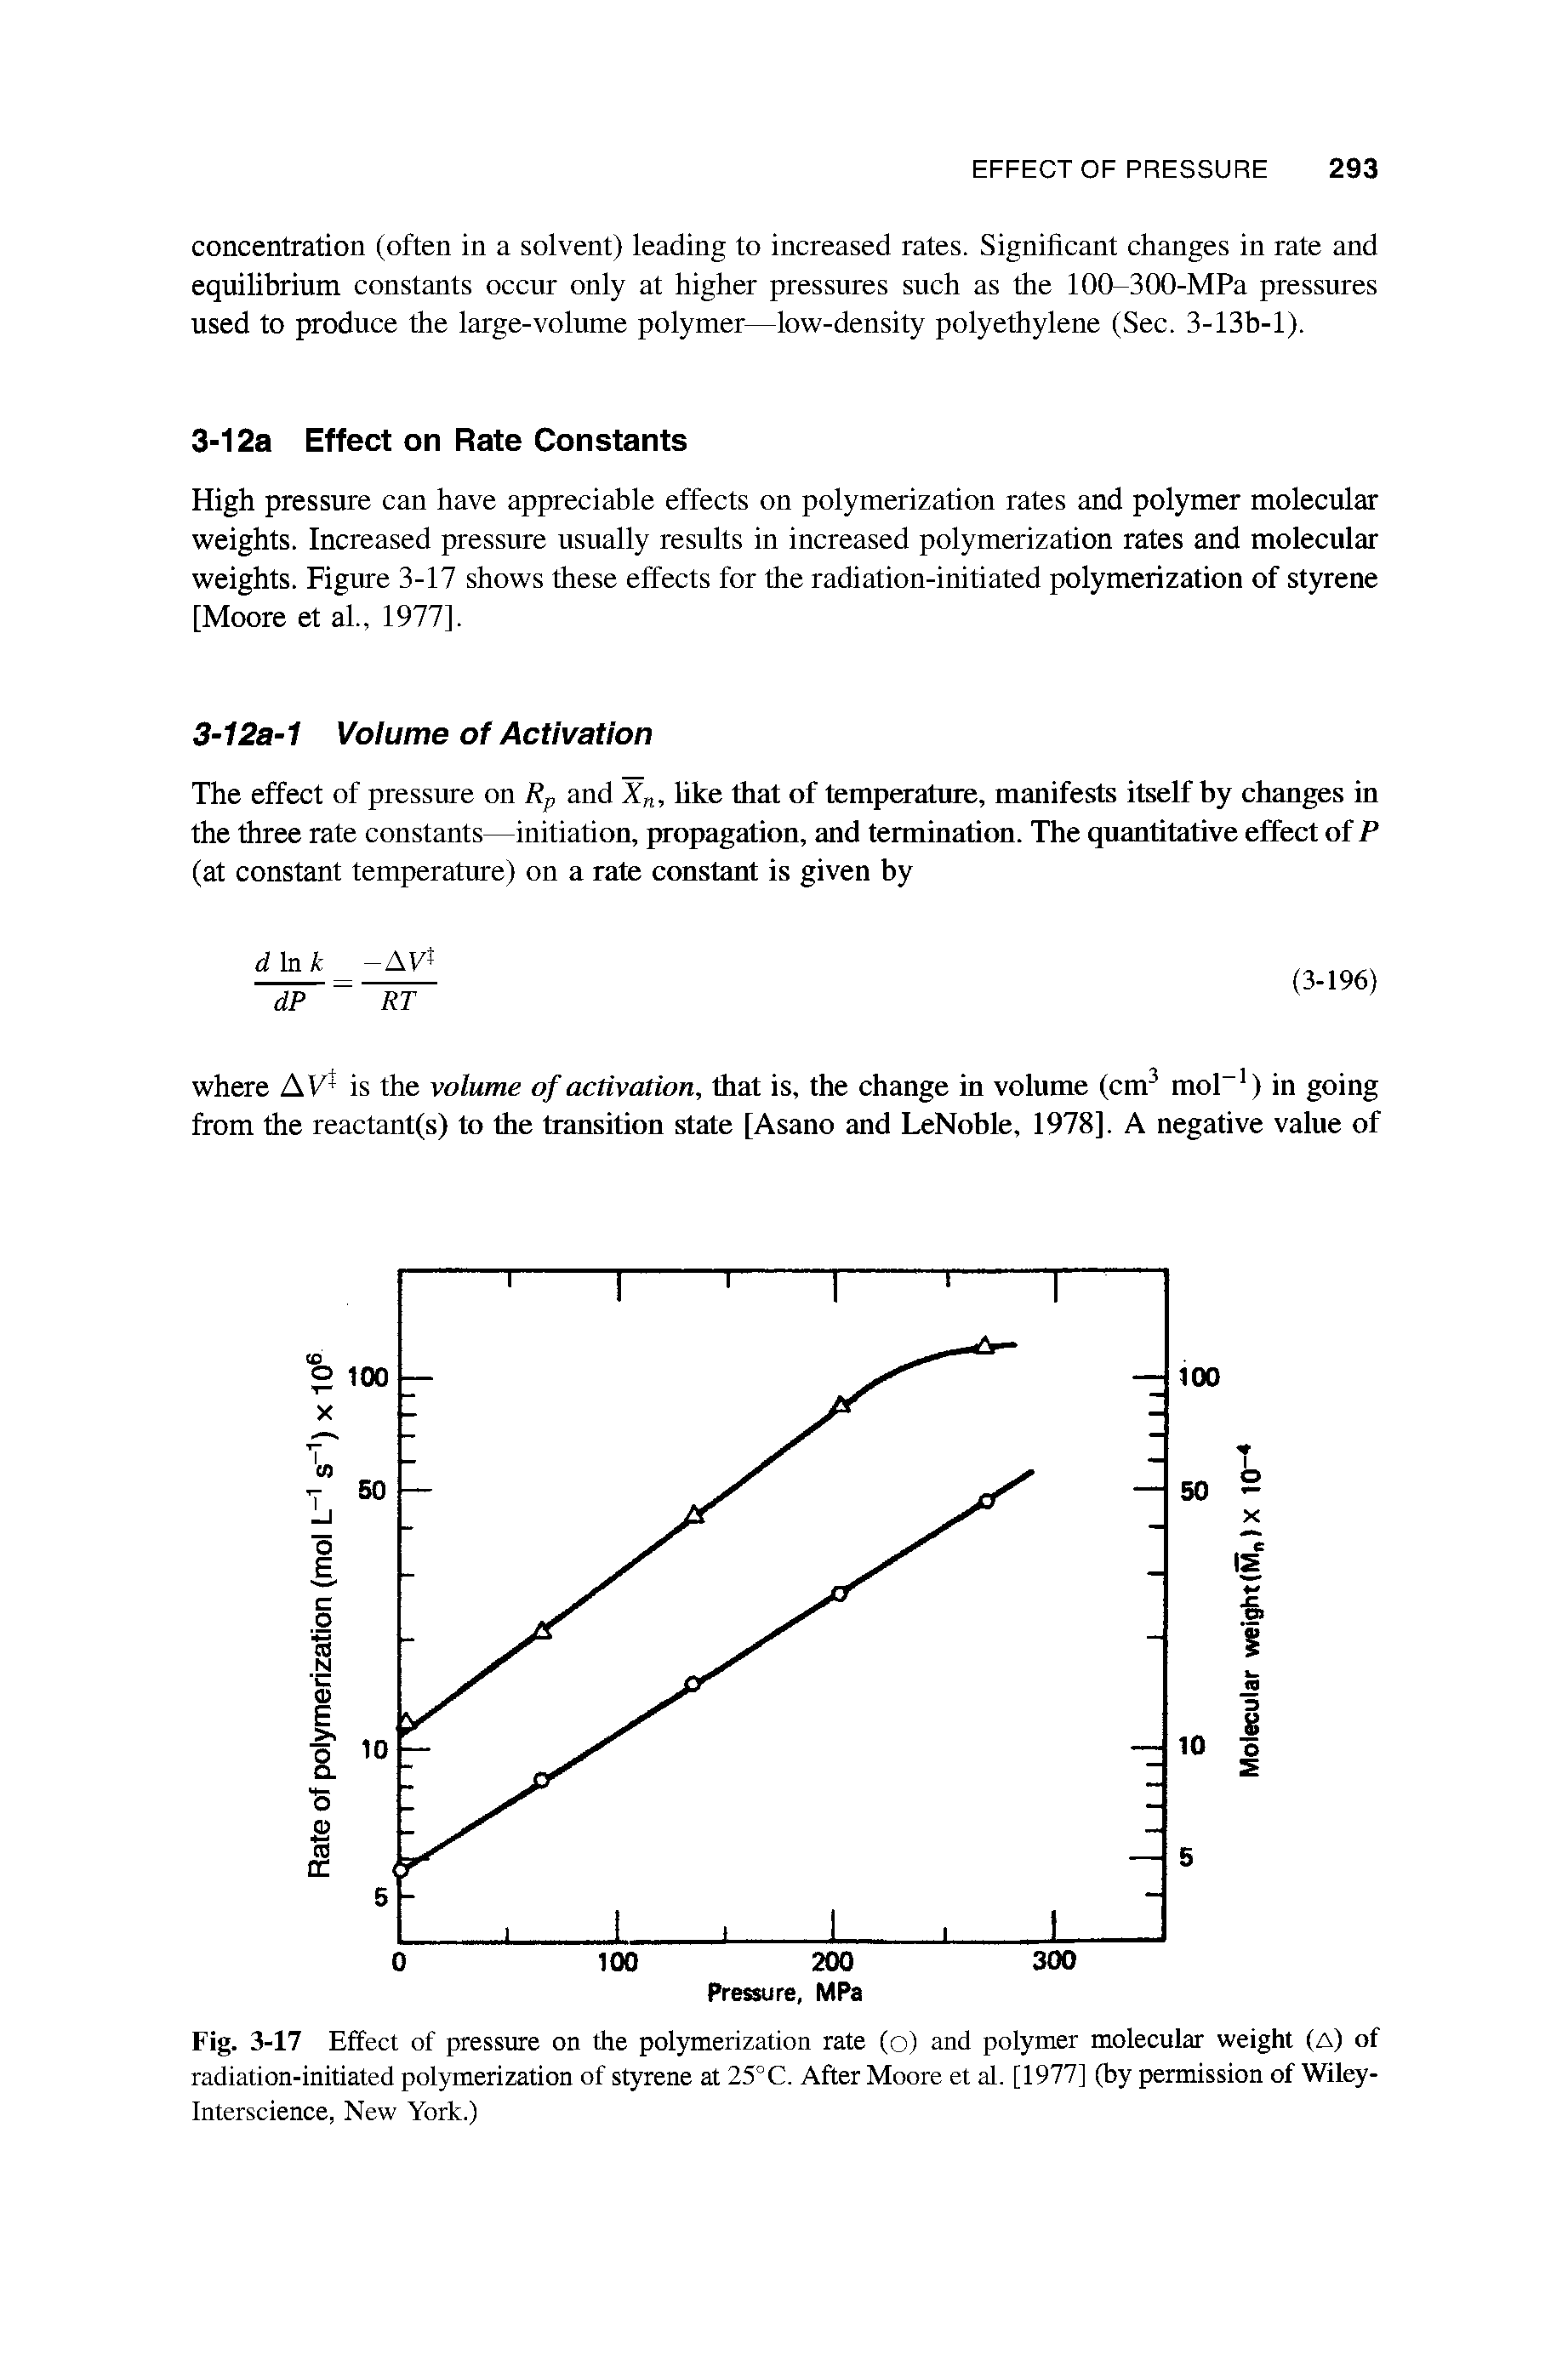 Fig. 3-17 Effect of pressure on the polymerization rate (o) and polymer molecular weight (A) of radiation-initiated polymerization of styrene at 25° C. After Moore et al. [1977] (by permission of Wiley-Interscience, New York.)...